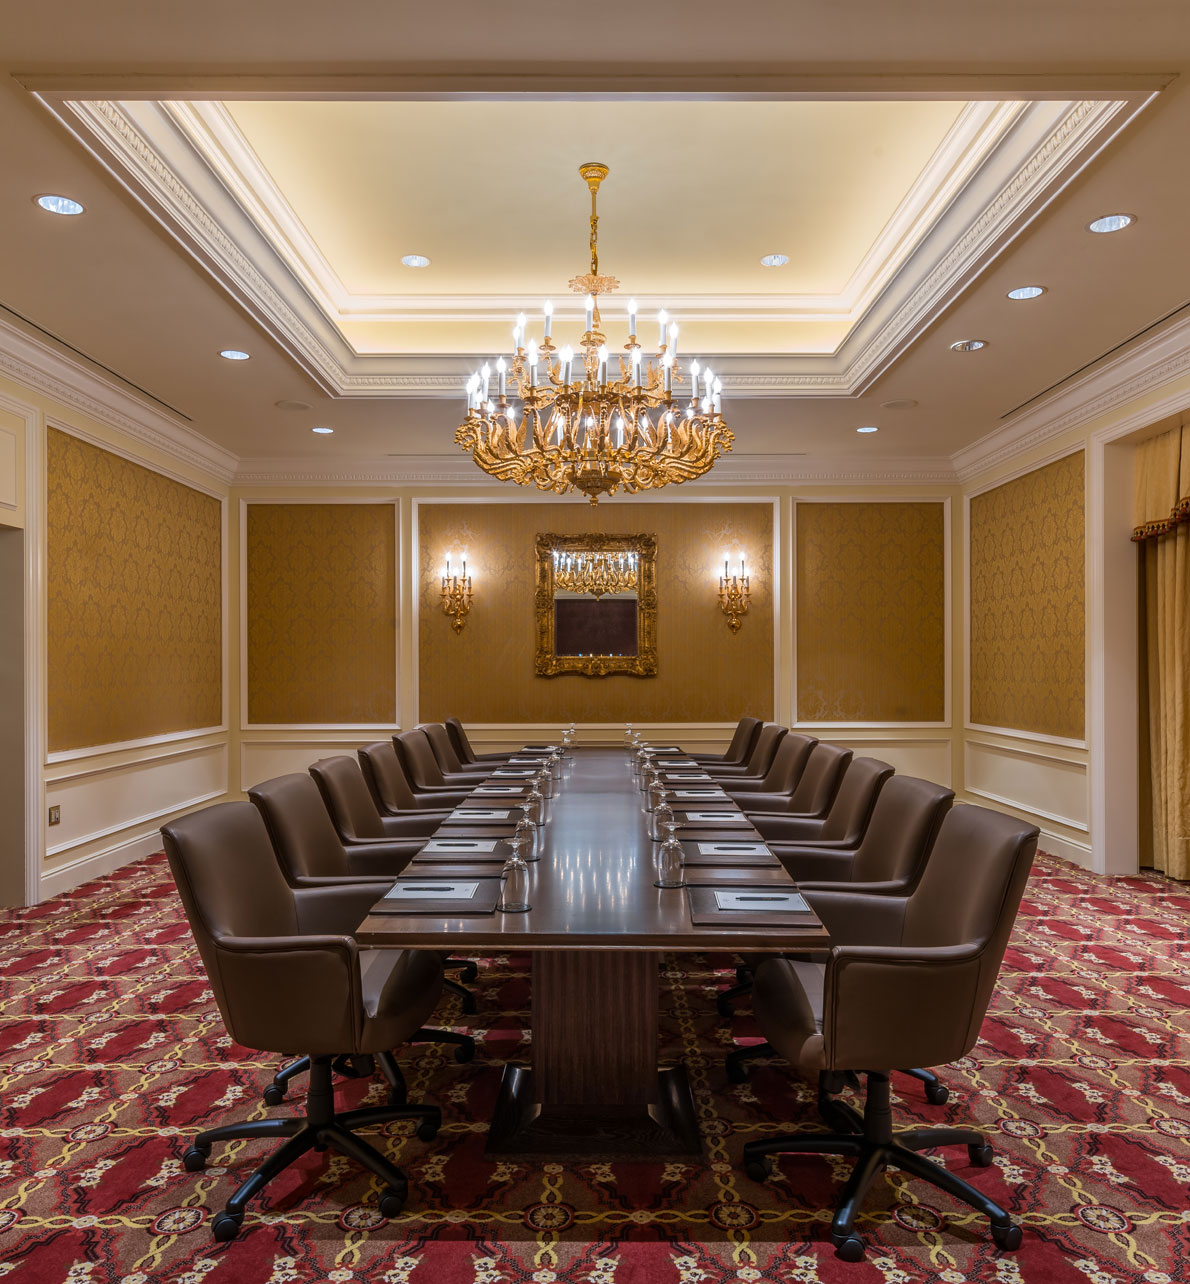 Bagetelle meeting space with boardroom on the third floor of The Grand America.